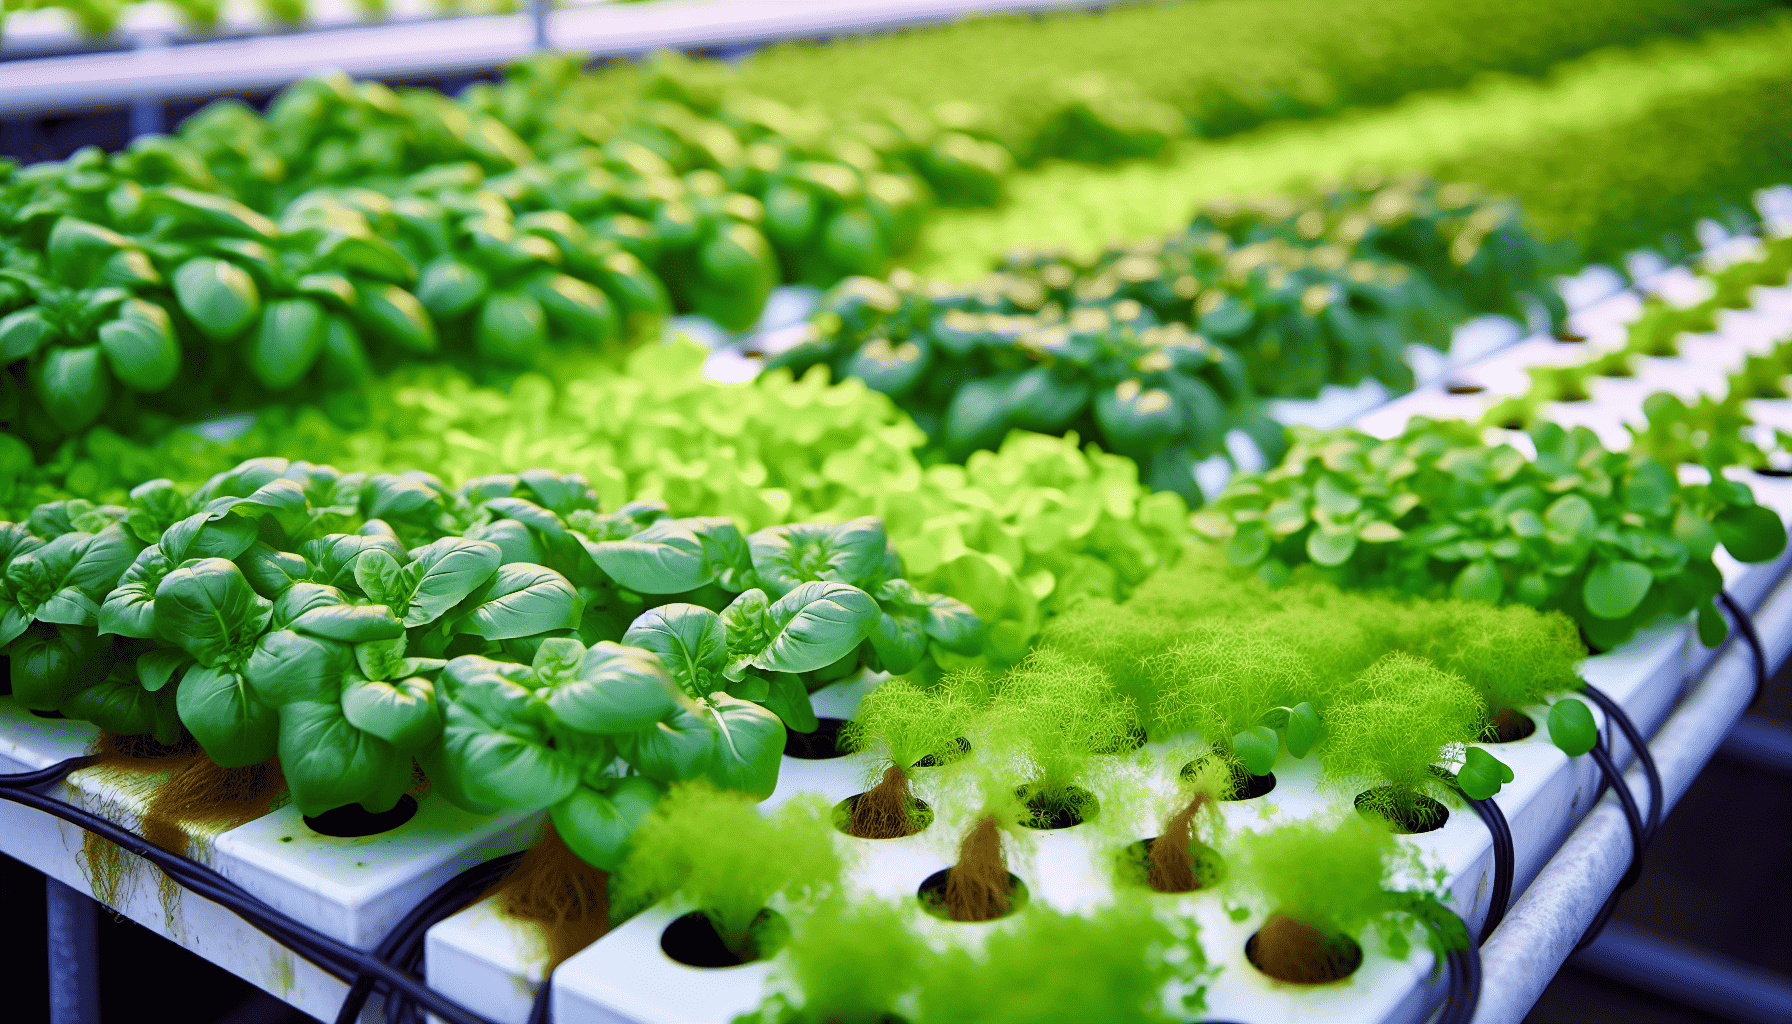 Healthy hydroponic plants with optimal growth